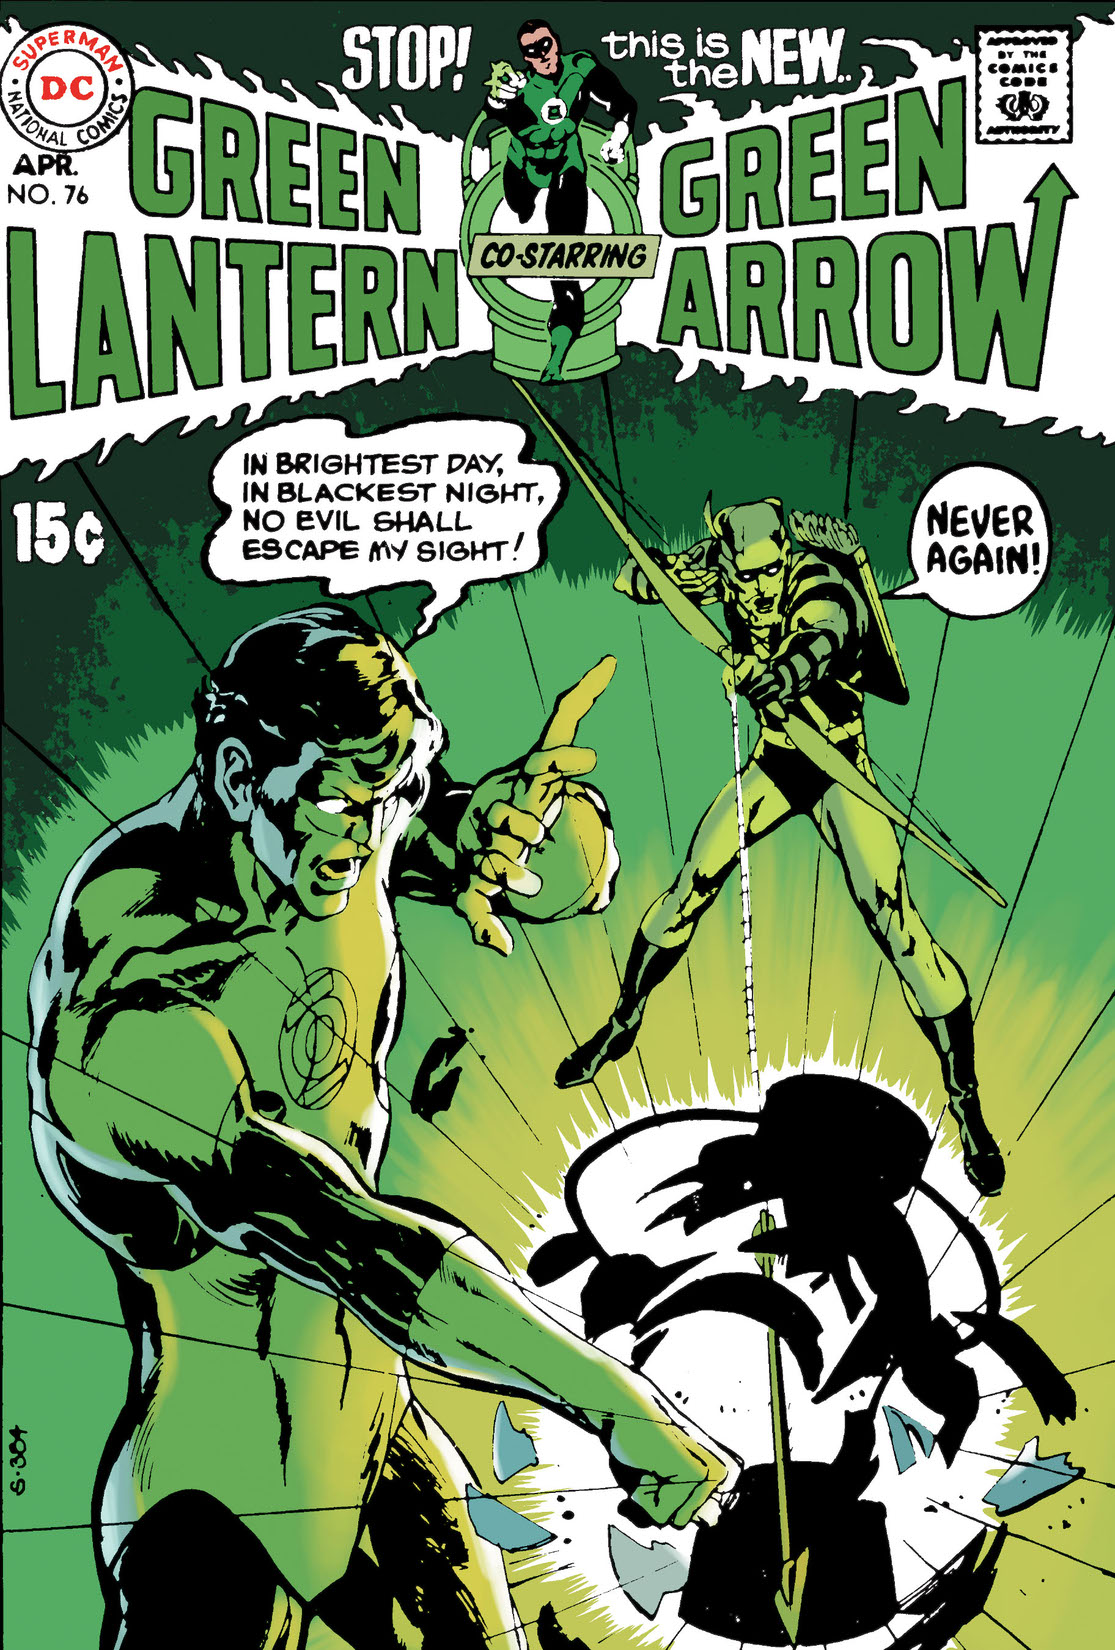 Green Lantern (1960-) #76 preview images